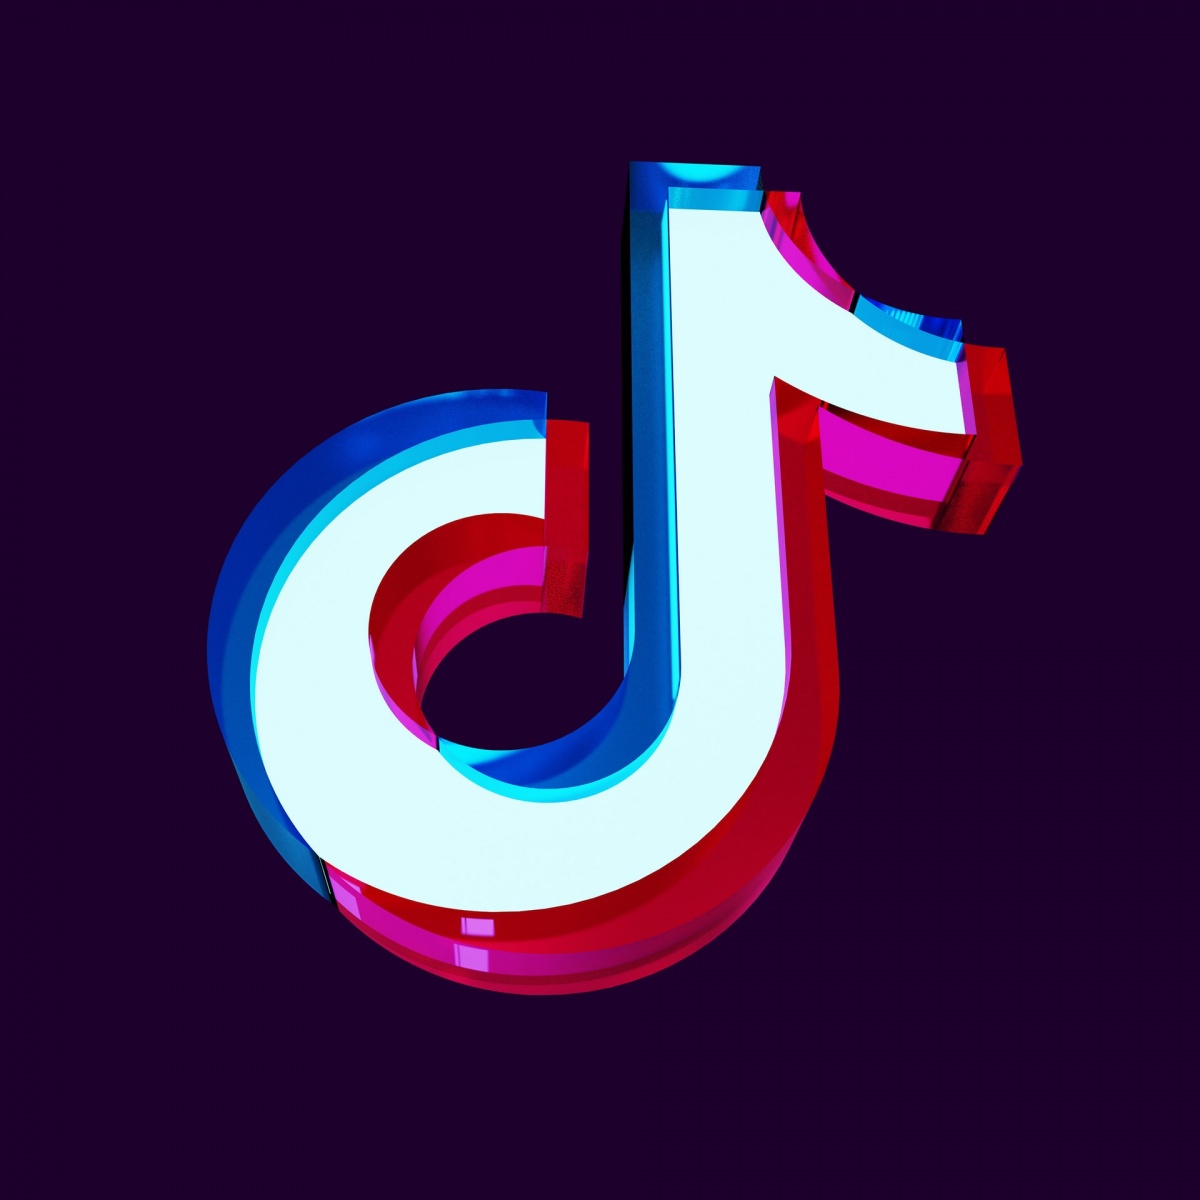 TikTok Video Length Extension: Company to Make More Money with Up to 10Min Videos